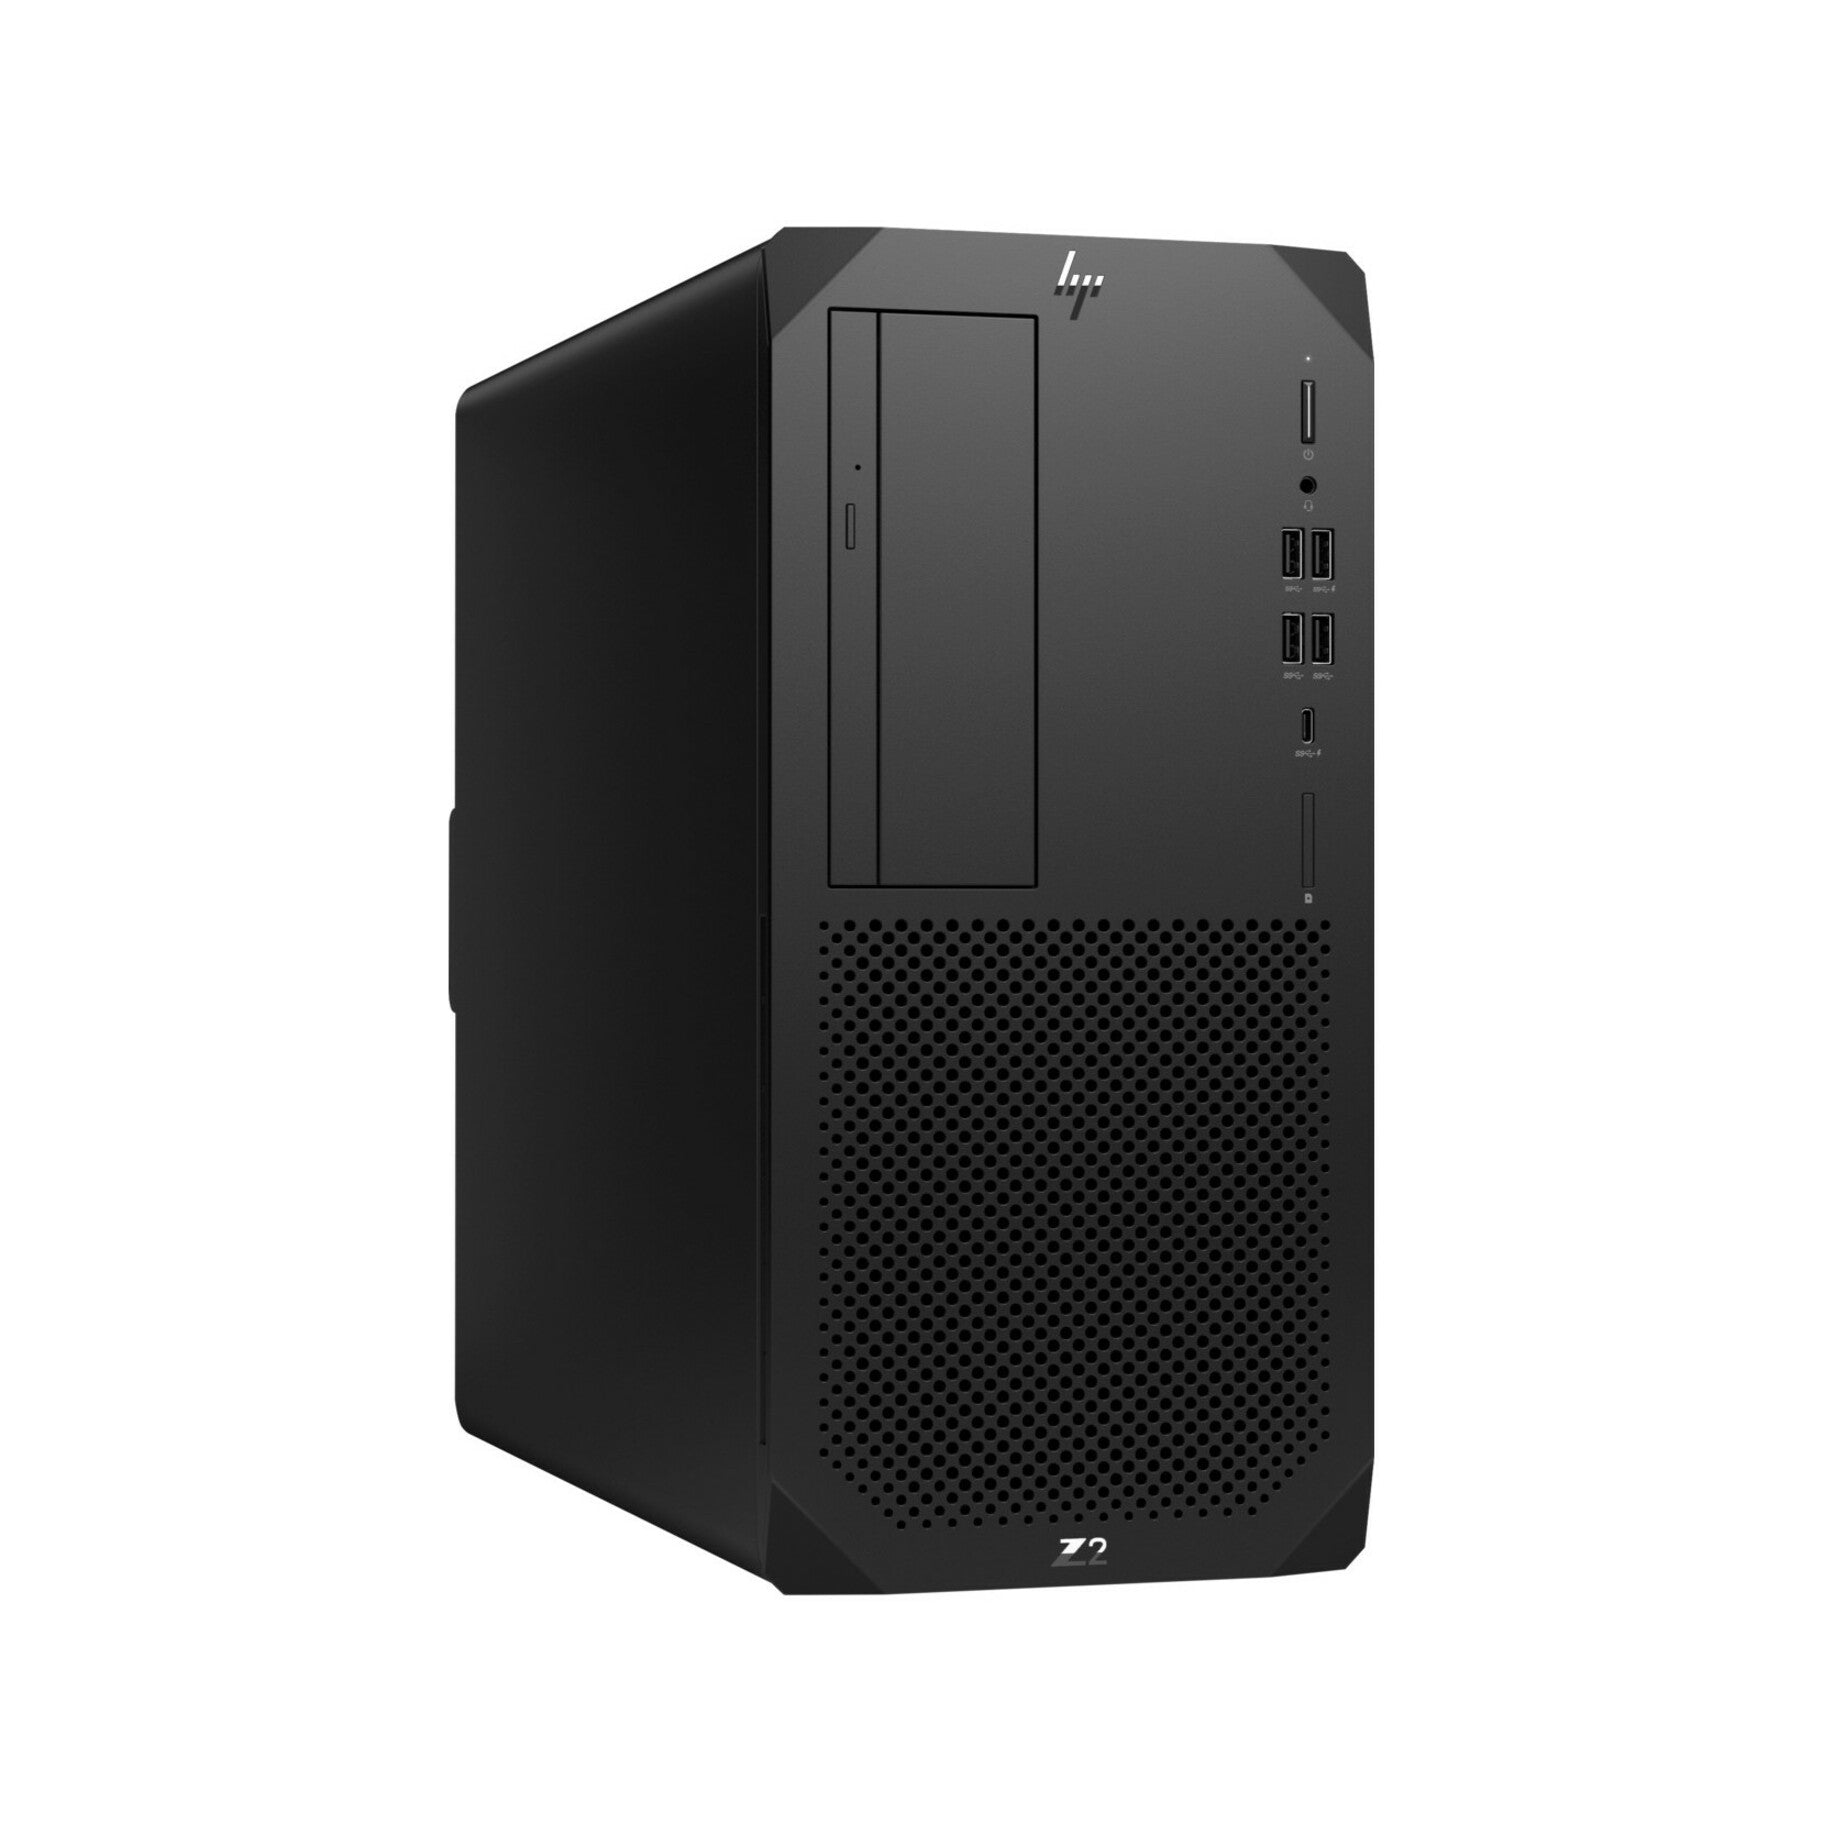 HP Z2 G9 Workstation - Intel Core i7 Dodeca-core - 32GB RAM - 1TB SSD - Tower [Discontinued]